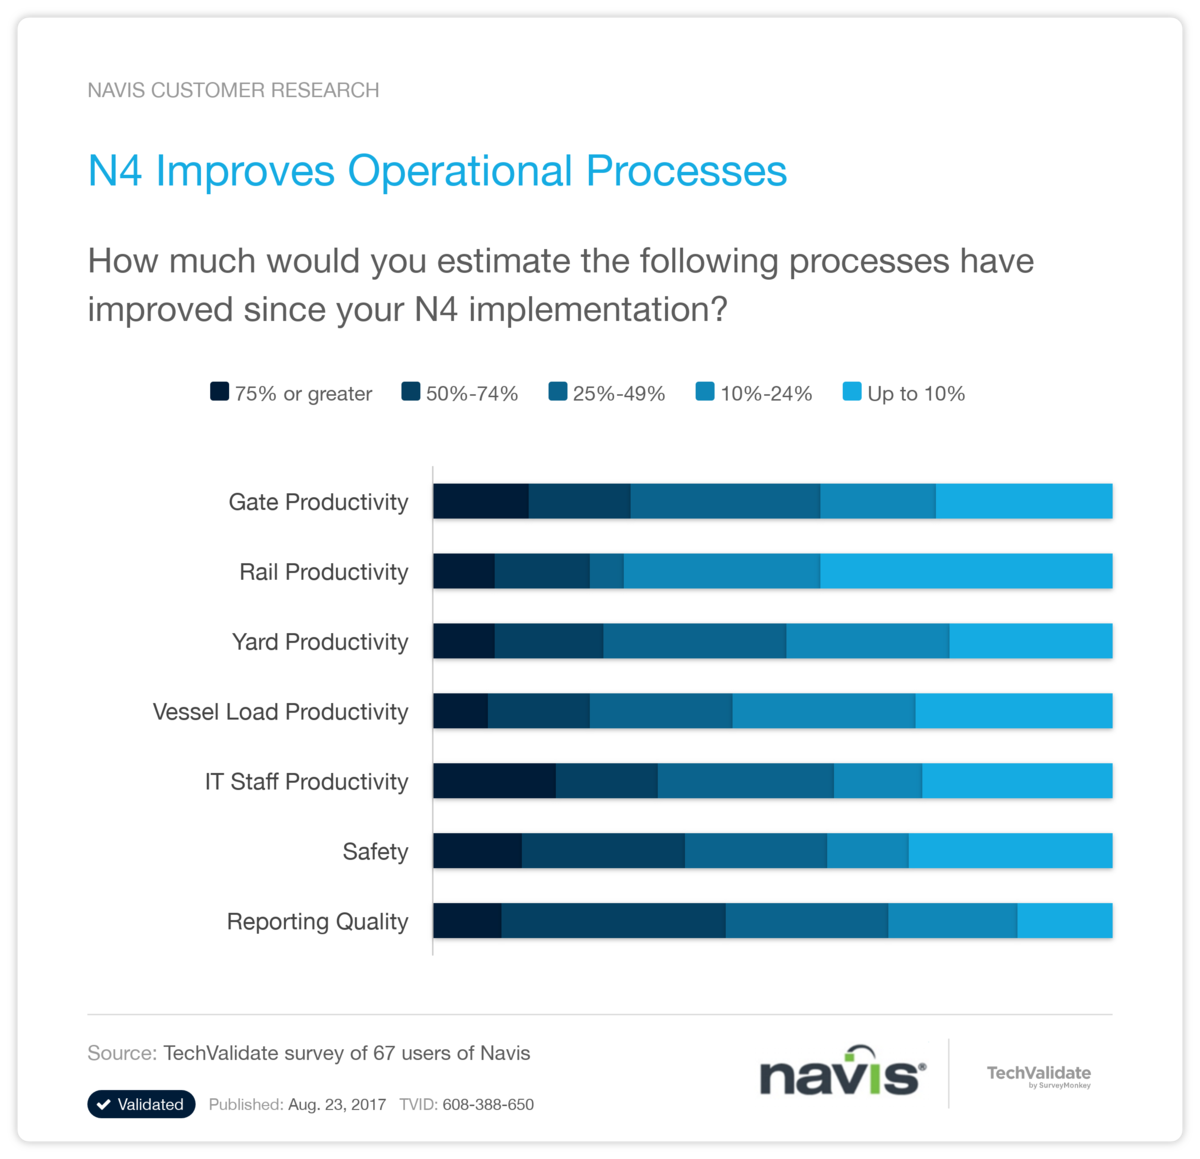 N4 Improves Operational Processes